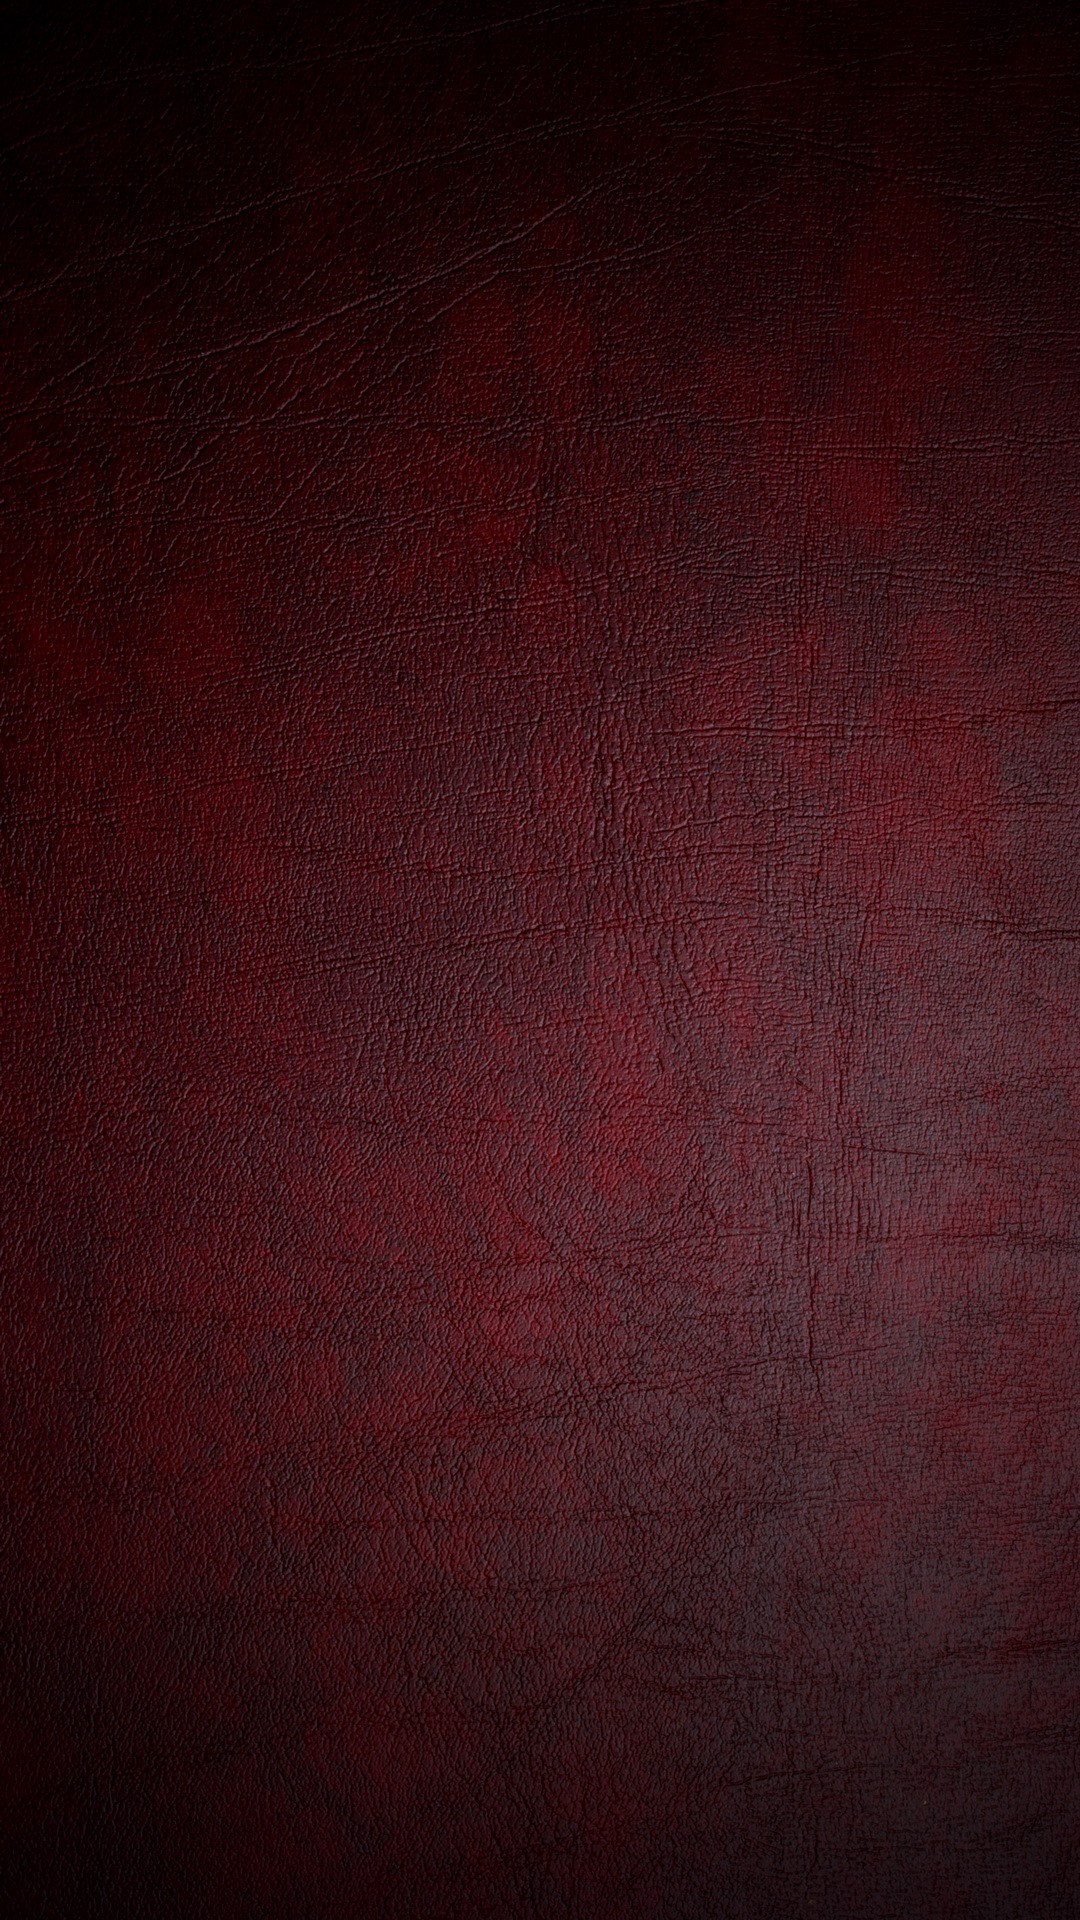 Leather Red Wallpaper - [1080x1920]